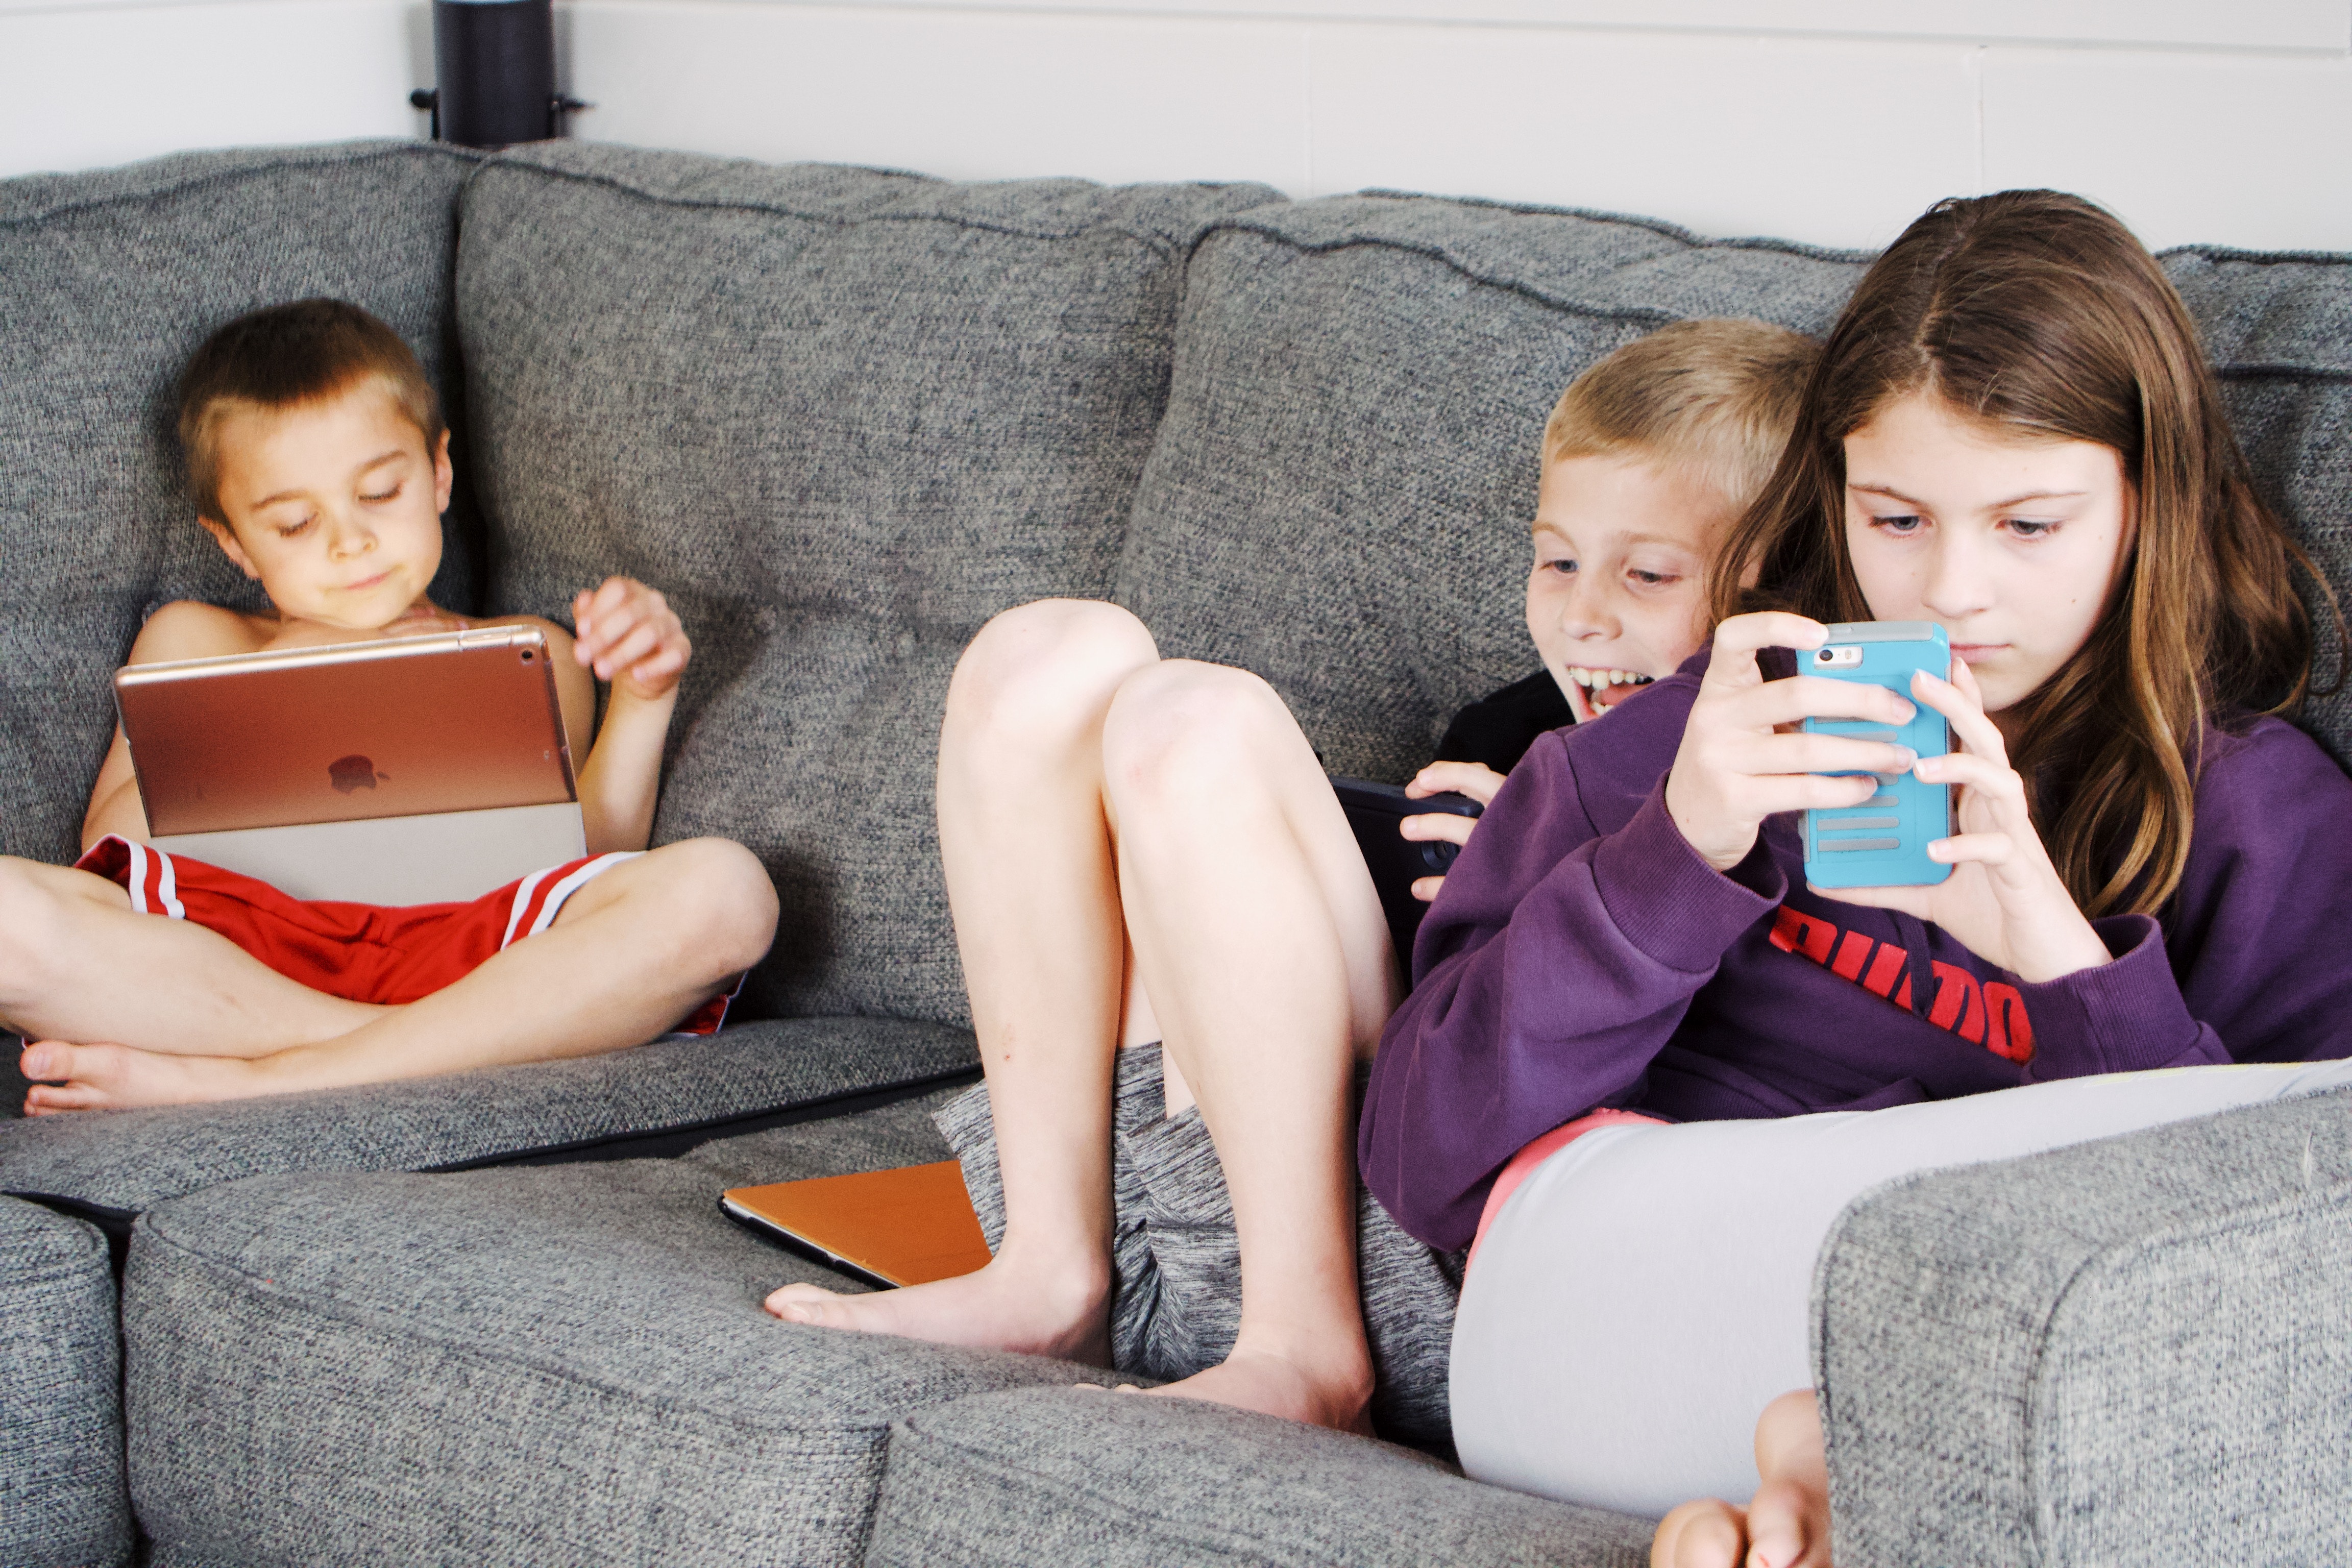 Image shows three children using various devices, including an iPad and a smart phone